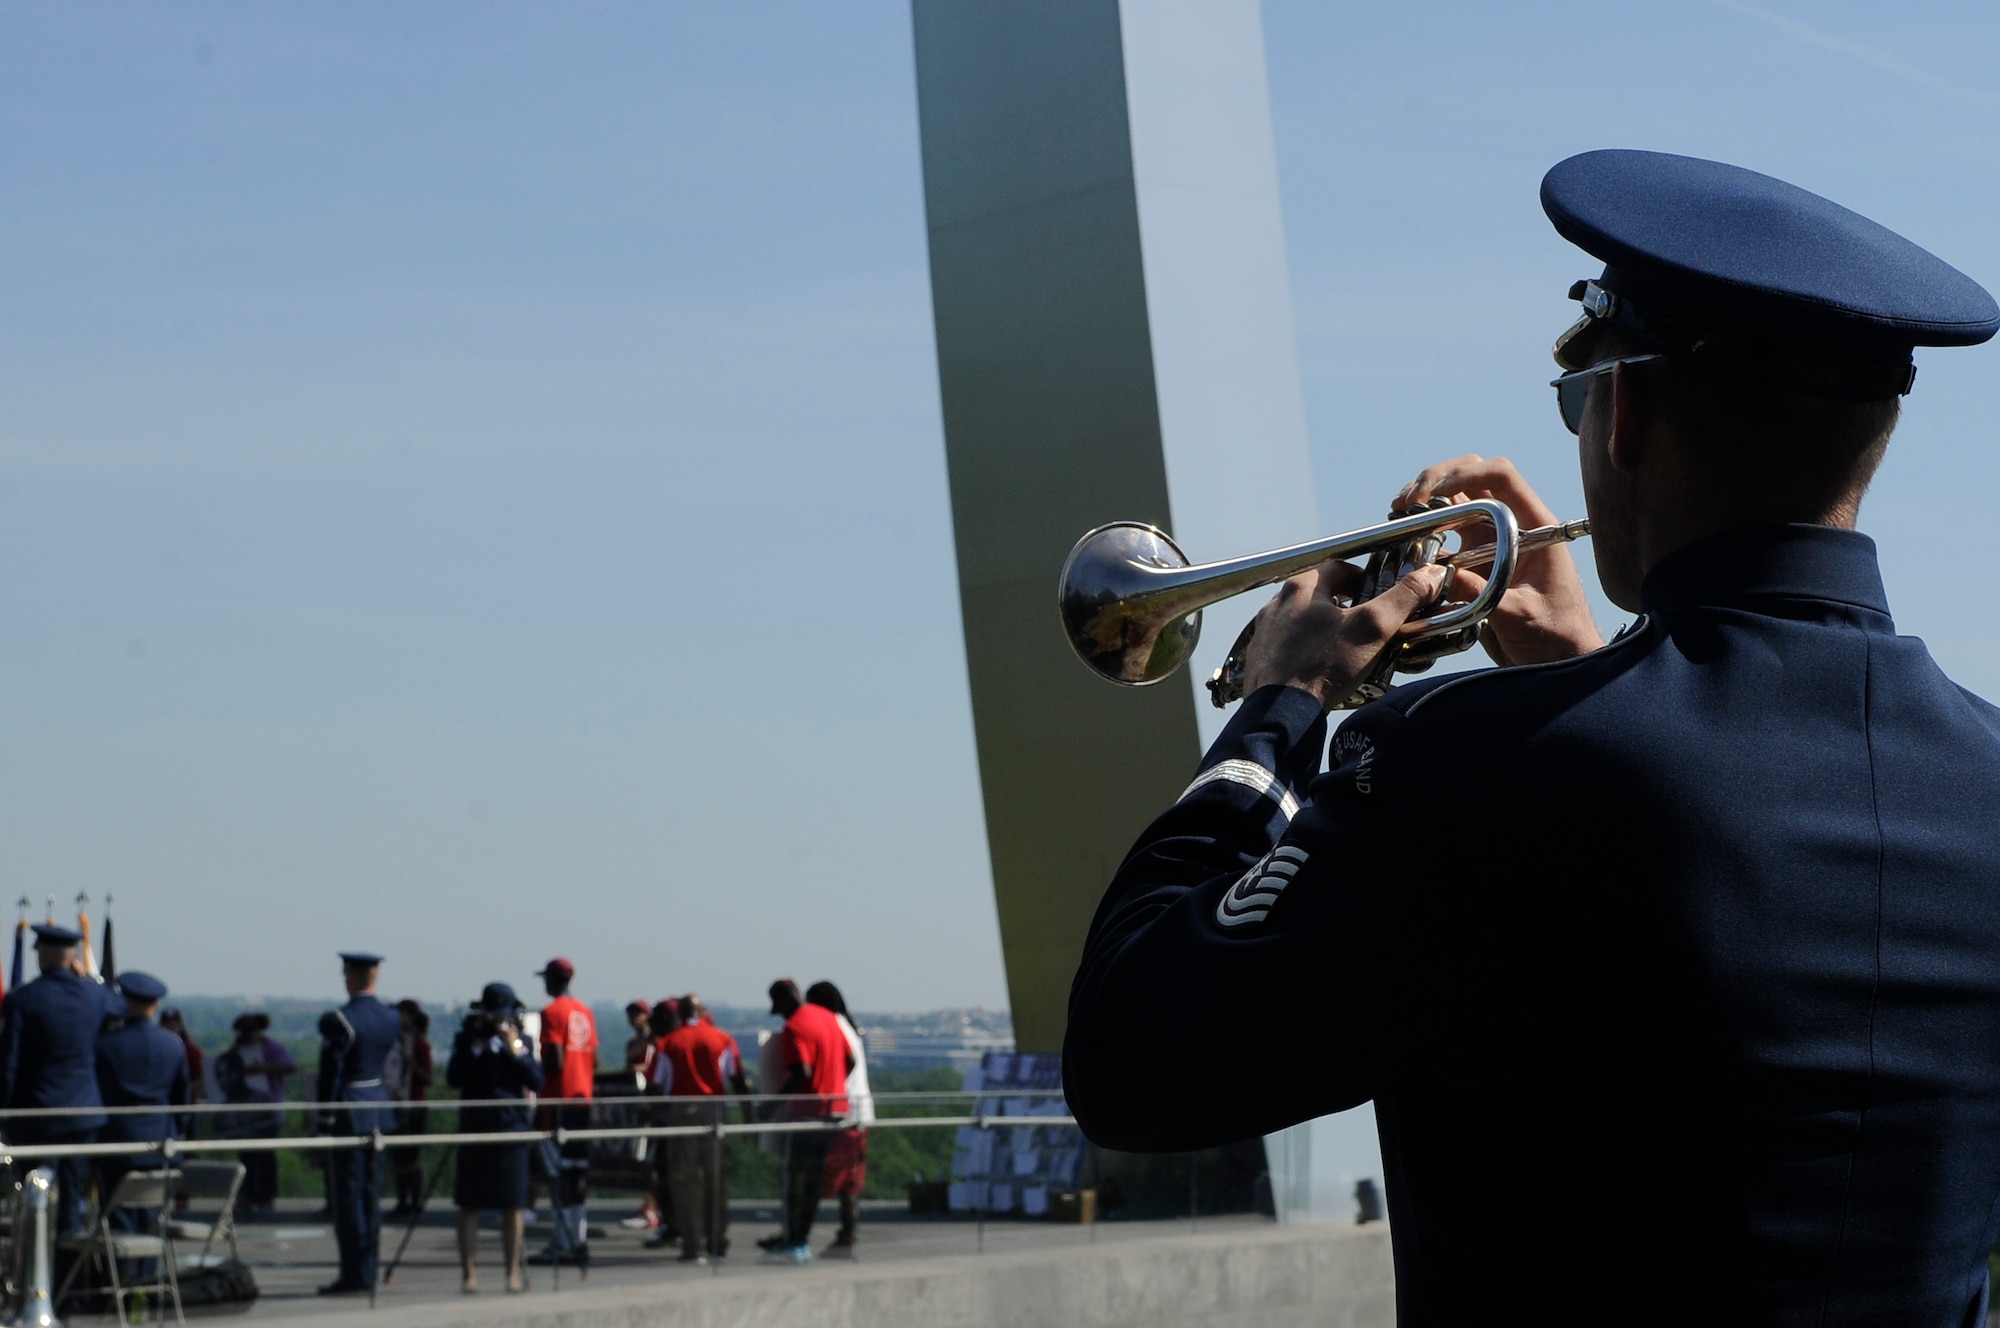 Tech. Sgt. Nathan Clark, U.S. Air Force Band ceremonial brass member, plays taps at the end of the Memorial Day wreath-laying ceremony at the Air Force Memorial May 25, 2015. Americans around the world continued the tradition of honoring fallen service members through a wreath-laying ceremony, parade or flag folding. (U.S. Air Force photo/Senior Airman Hailey Haux)